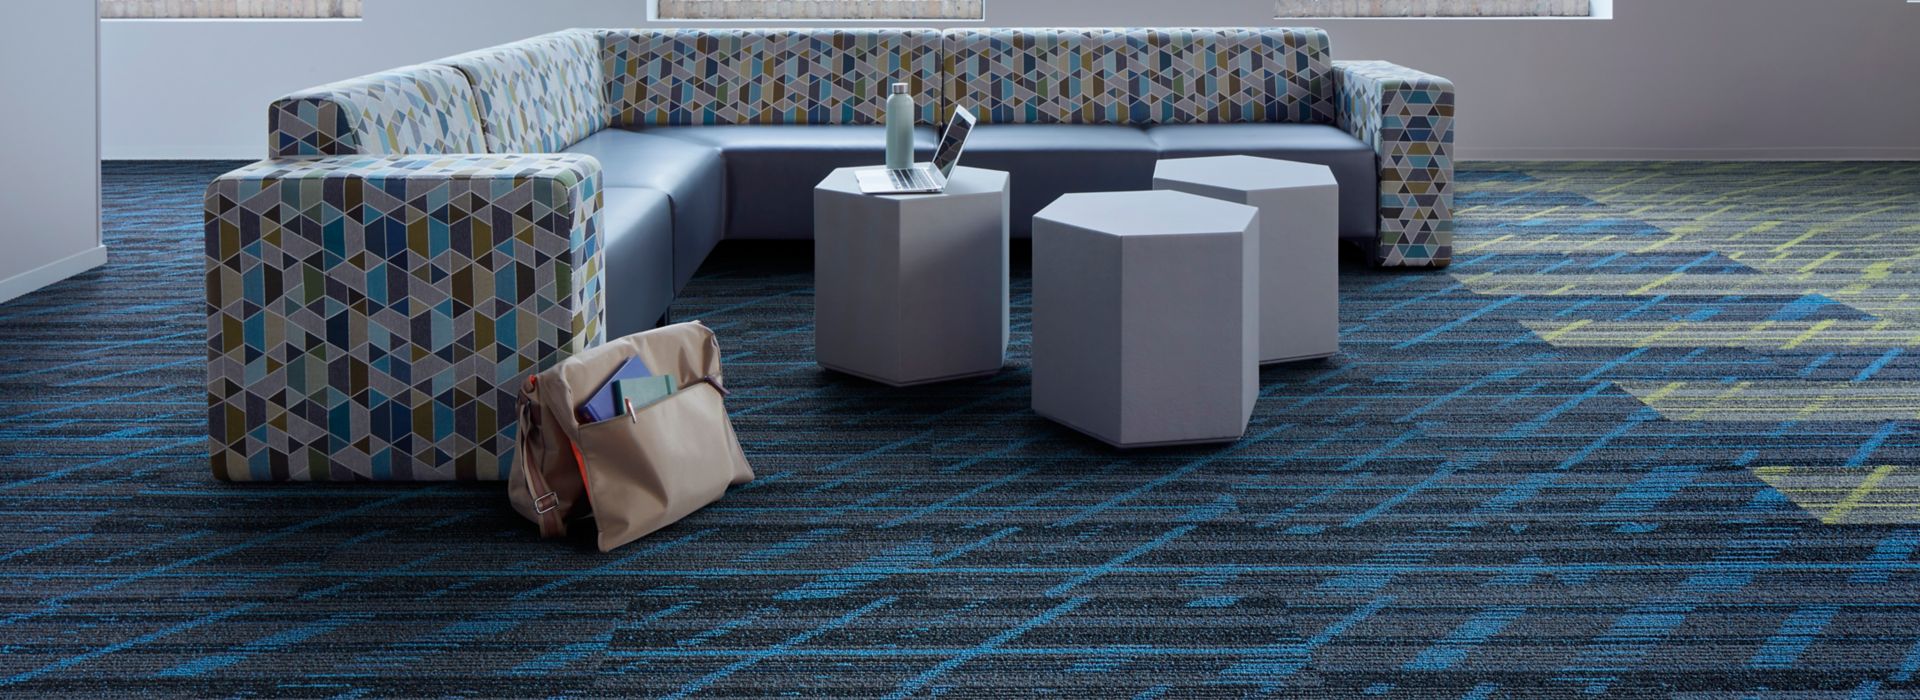 Interface Luminescent plank tile in seating area